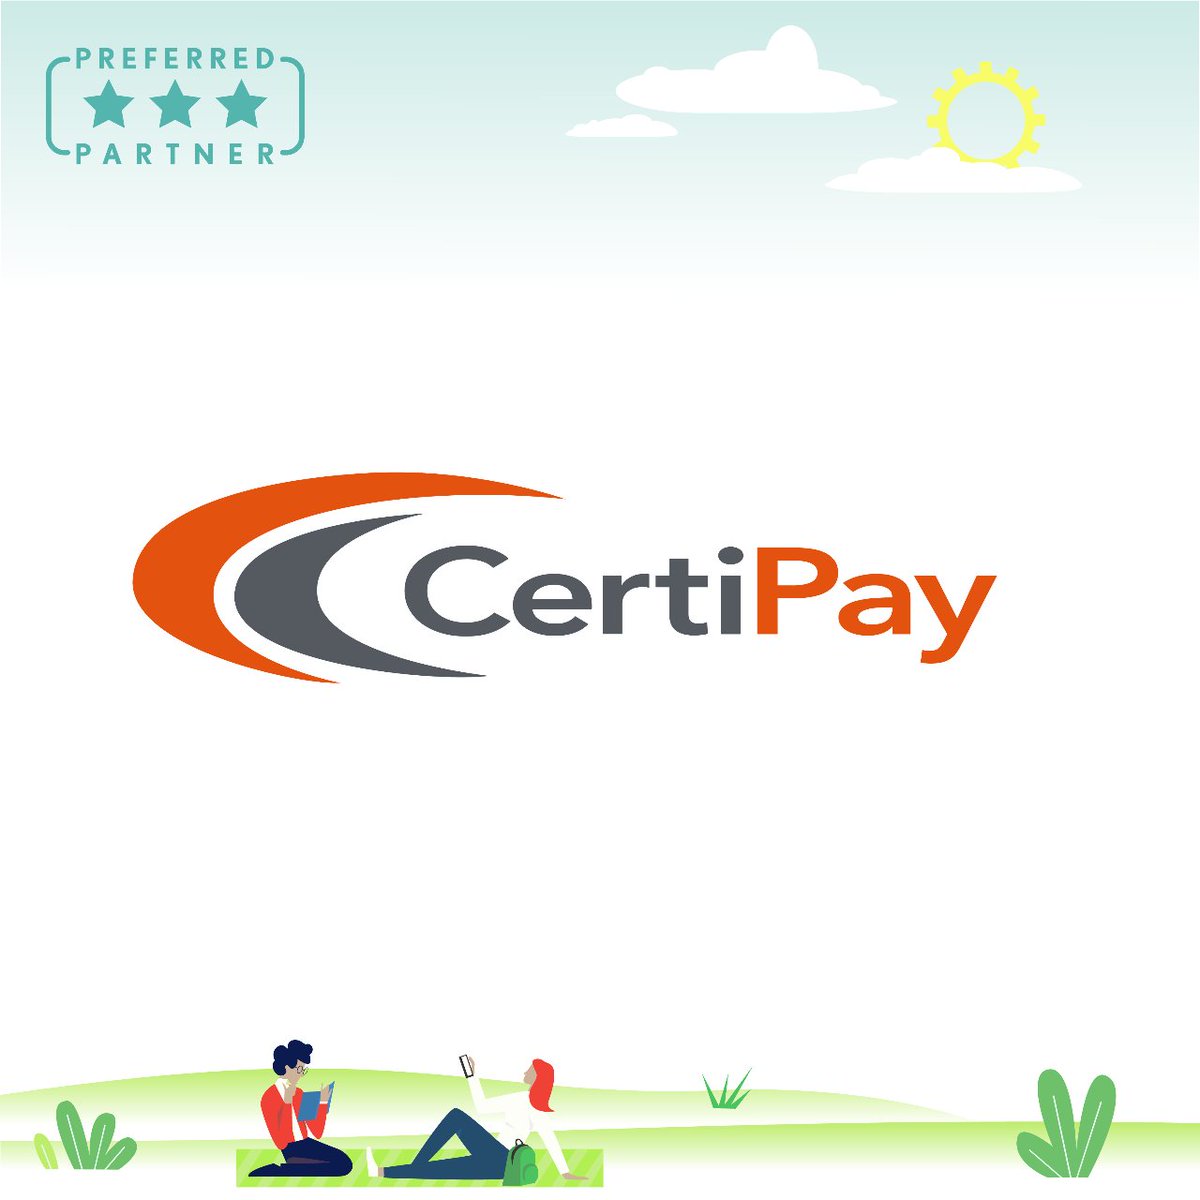 We are proud to integrate with @CertiPay, one of our preferred partners.

#TechTuesday #Technology #Integrated #Innovation #Partnerships #GettingThingsDone #Programming #ATSsoftware #Recruiting #TalentAcquisition #Hiring  #CertiPay